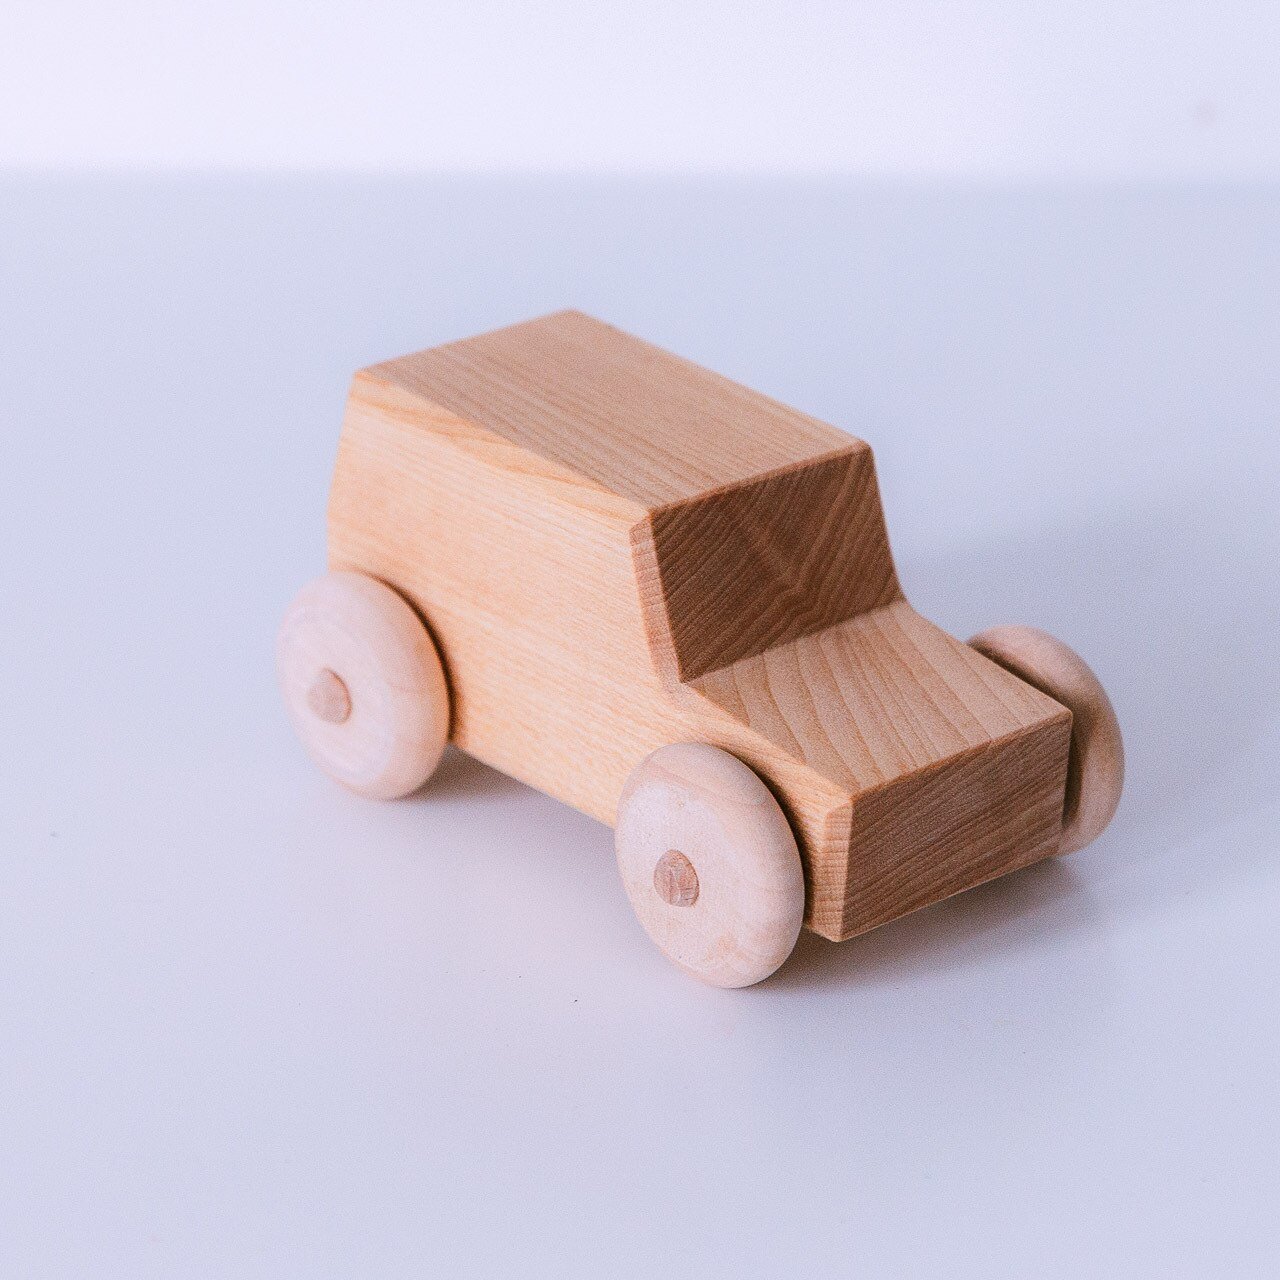 Classic Wooden Car by Avdar Toys